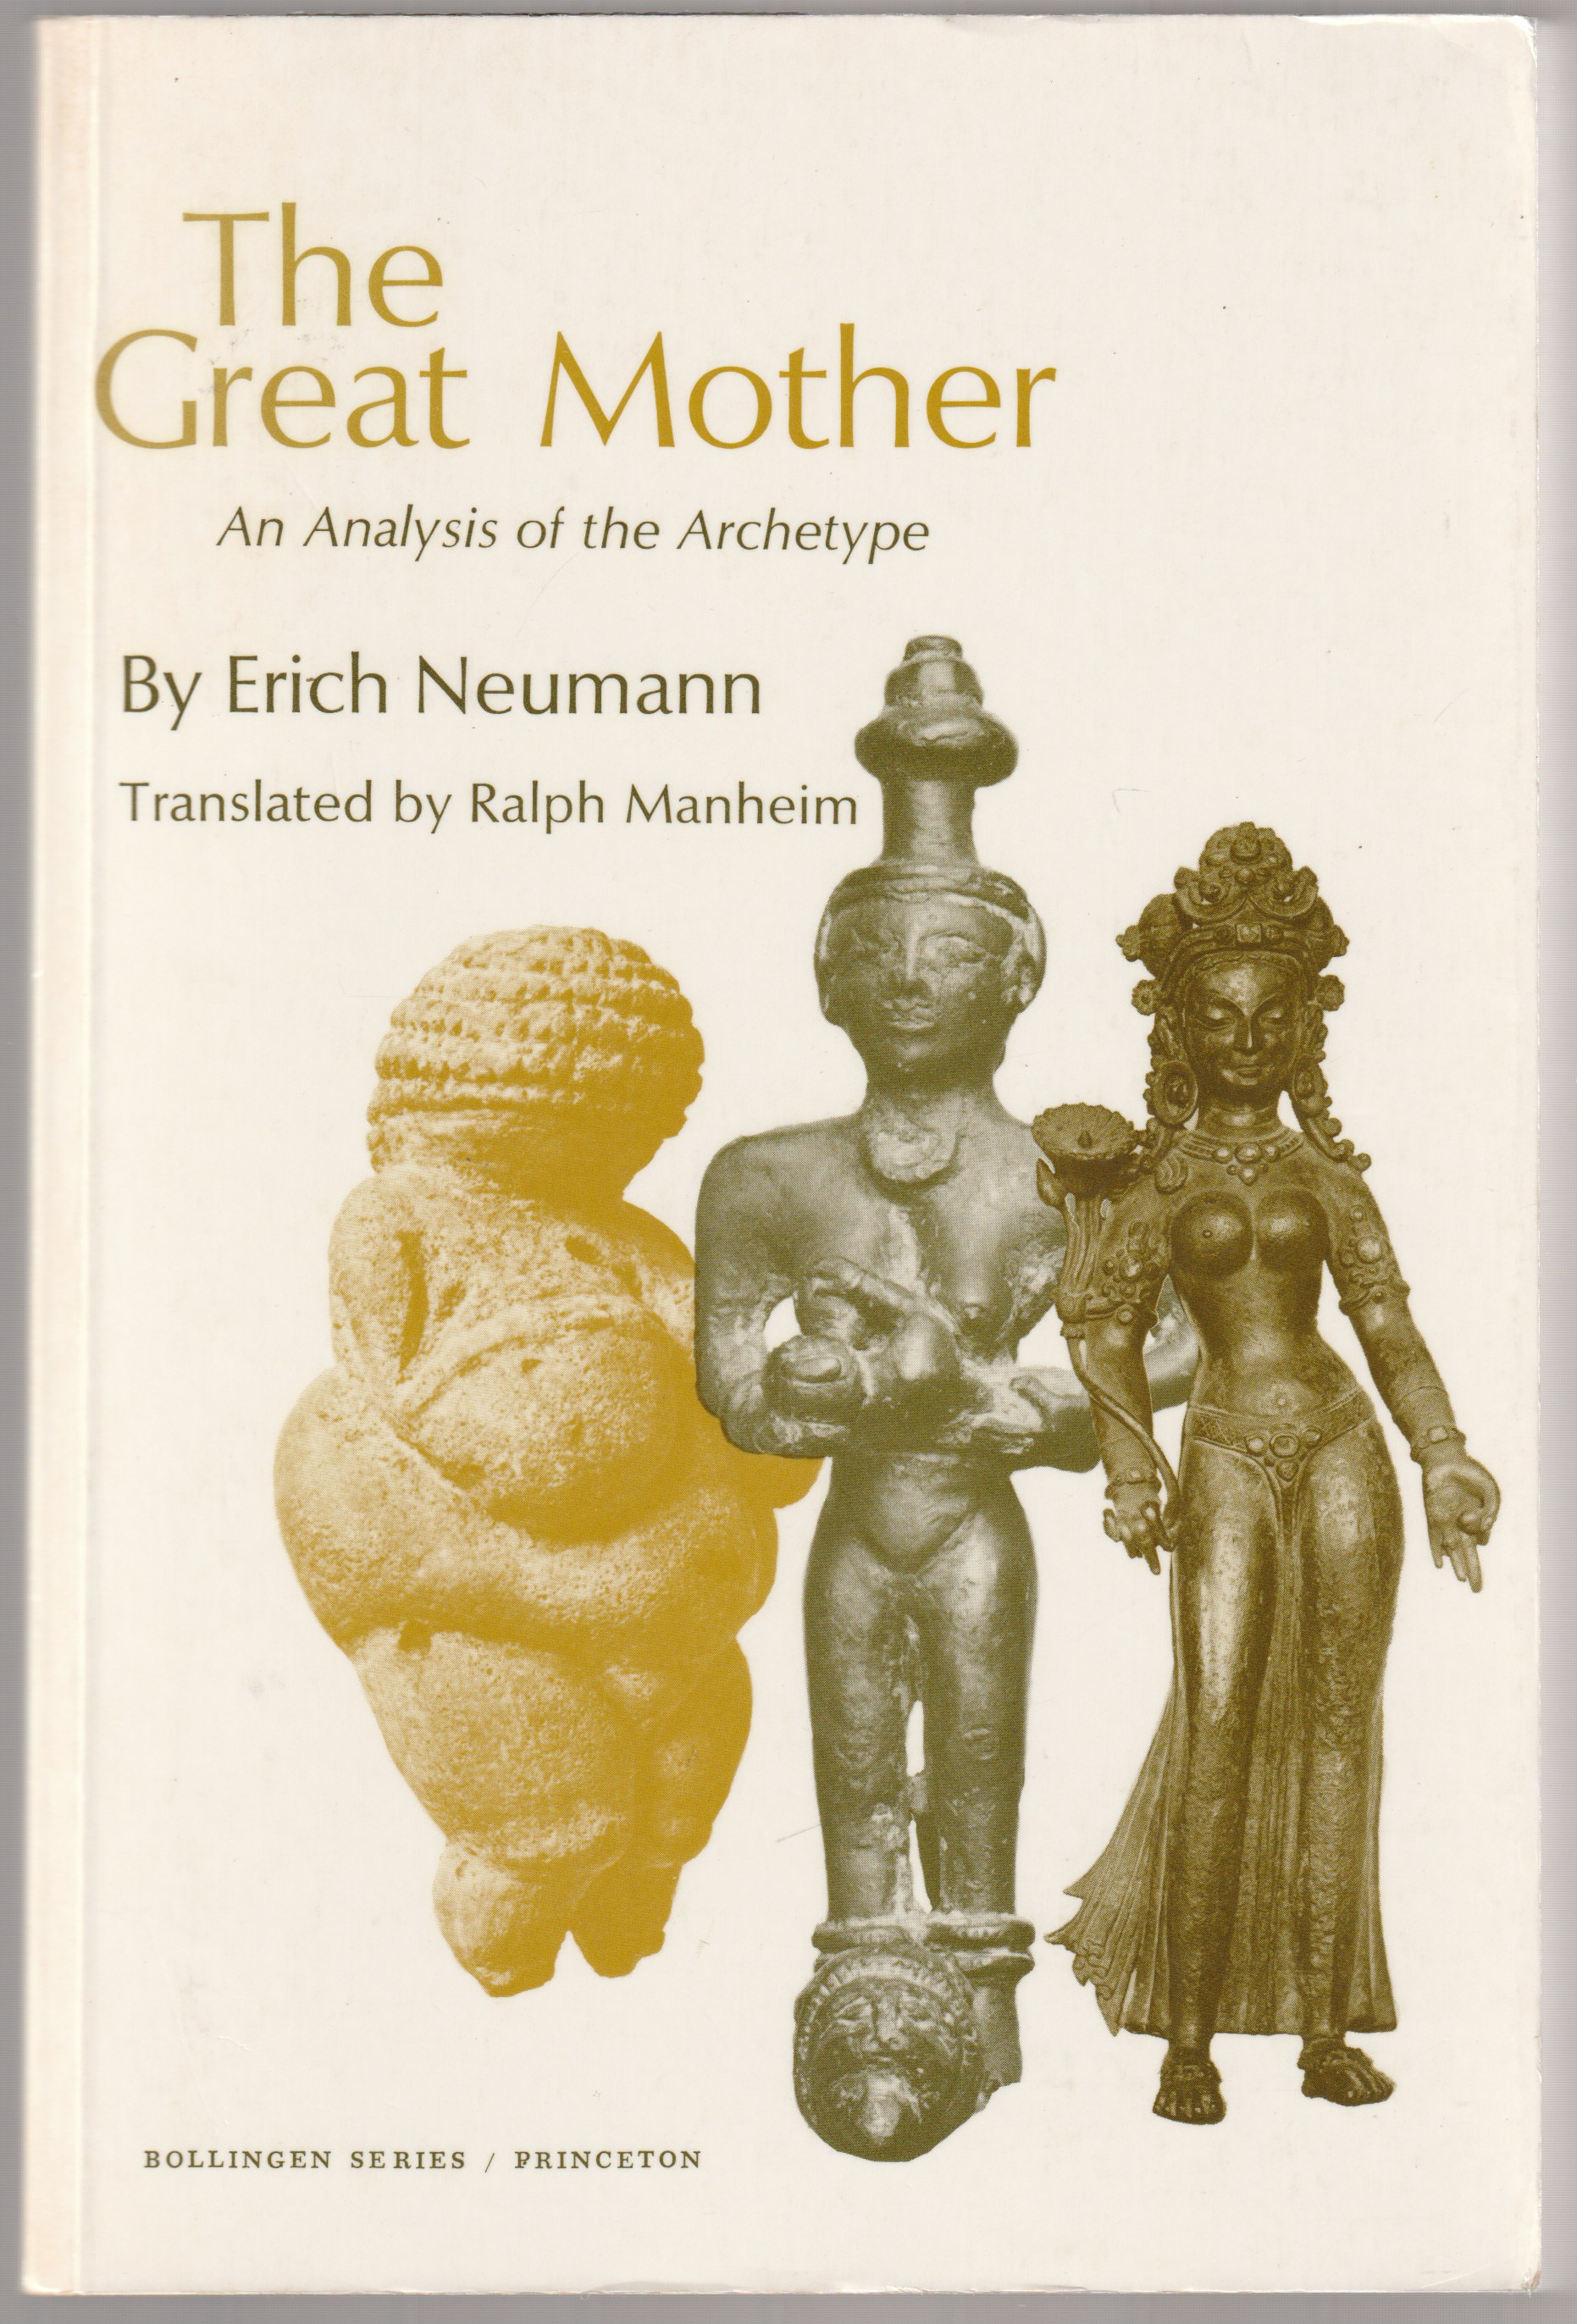 The great mother : an analysis of the archetype.